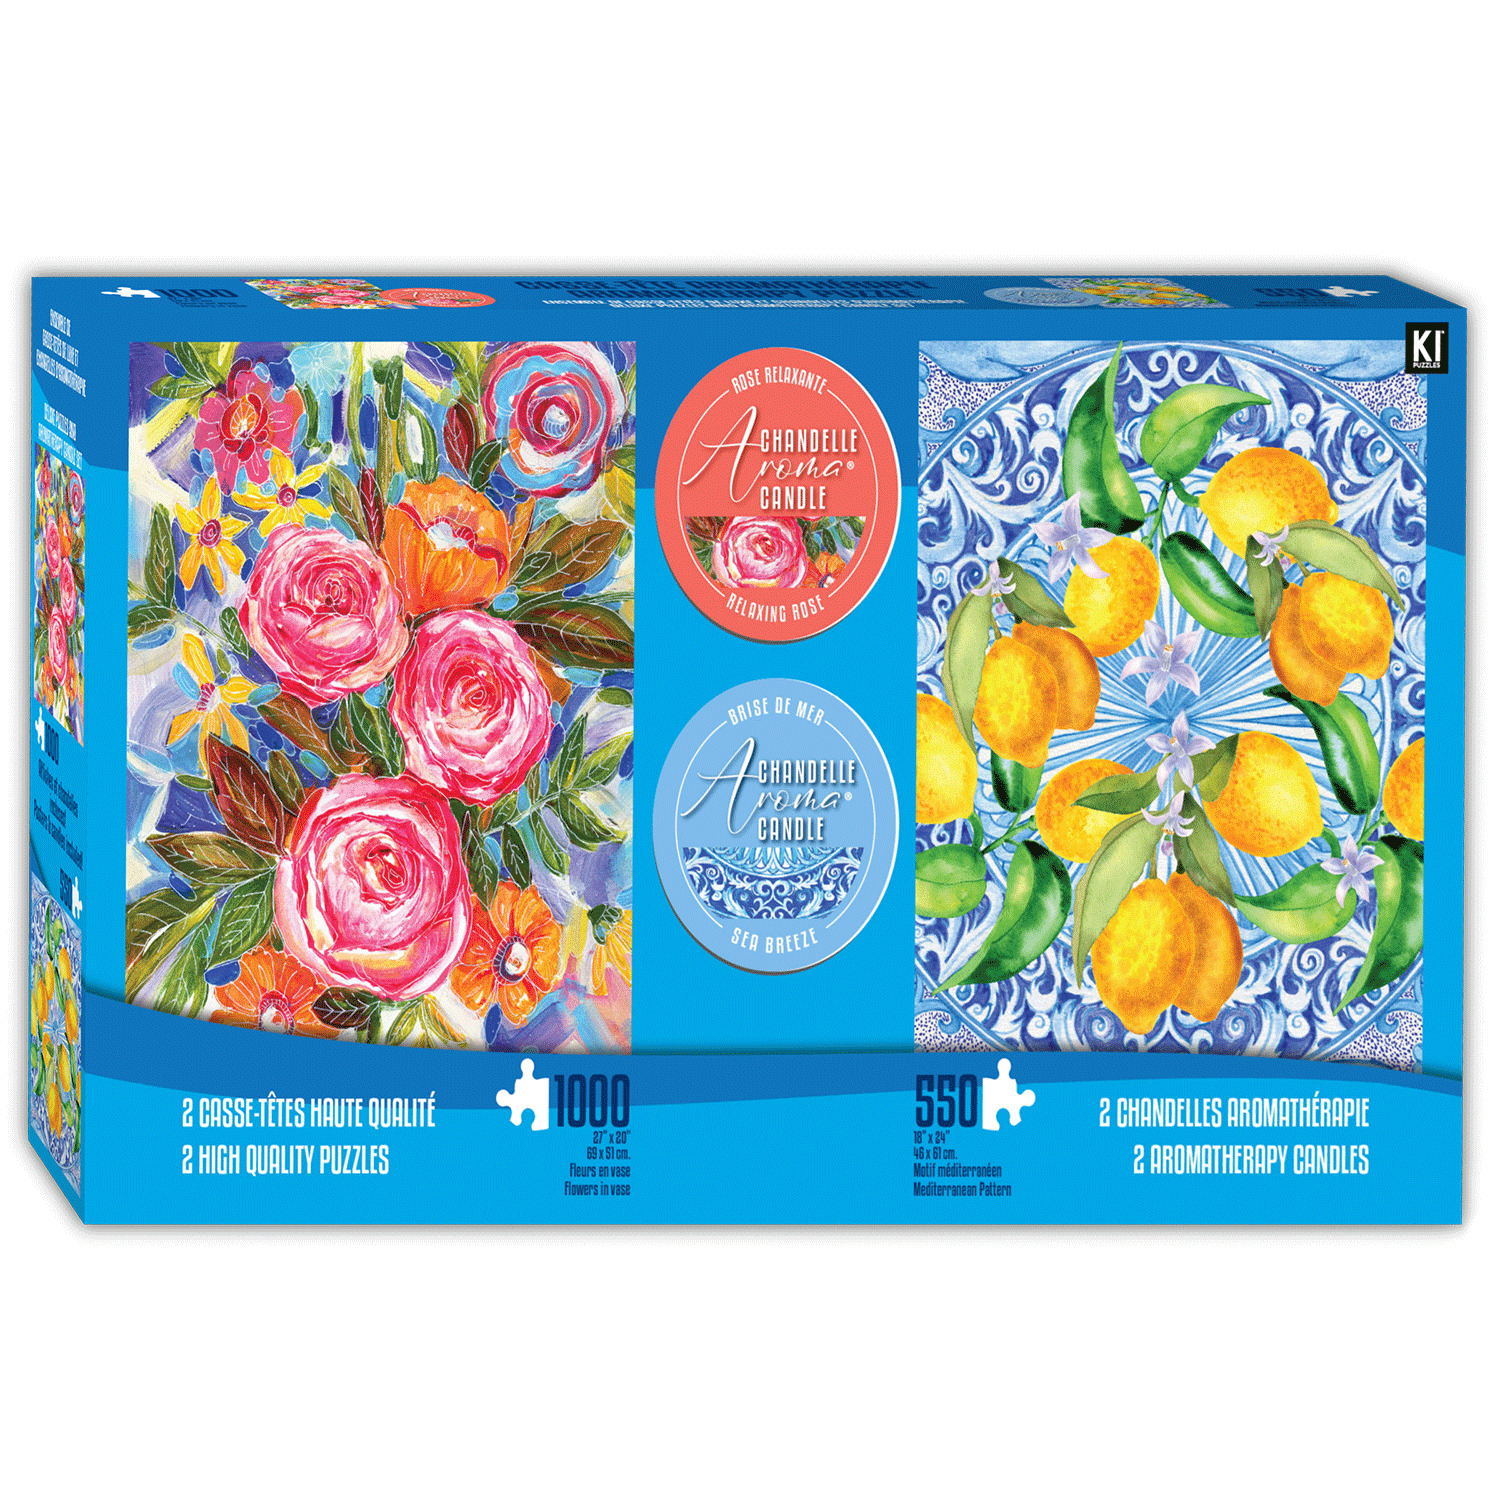 KI - Puzzles, 2 high quality puzzles with 2 aromatherapy candles